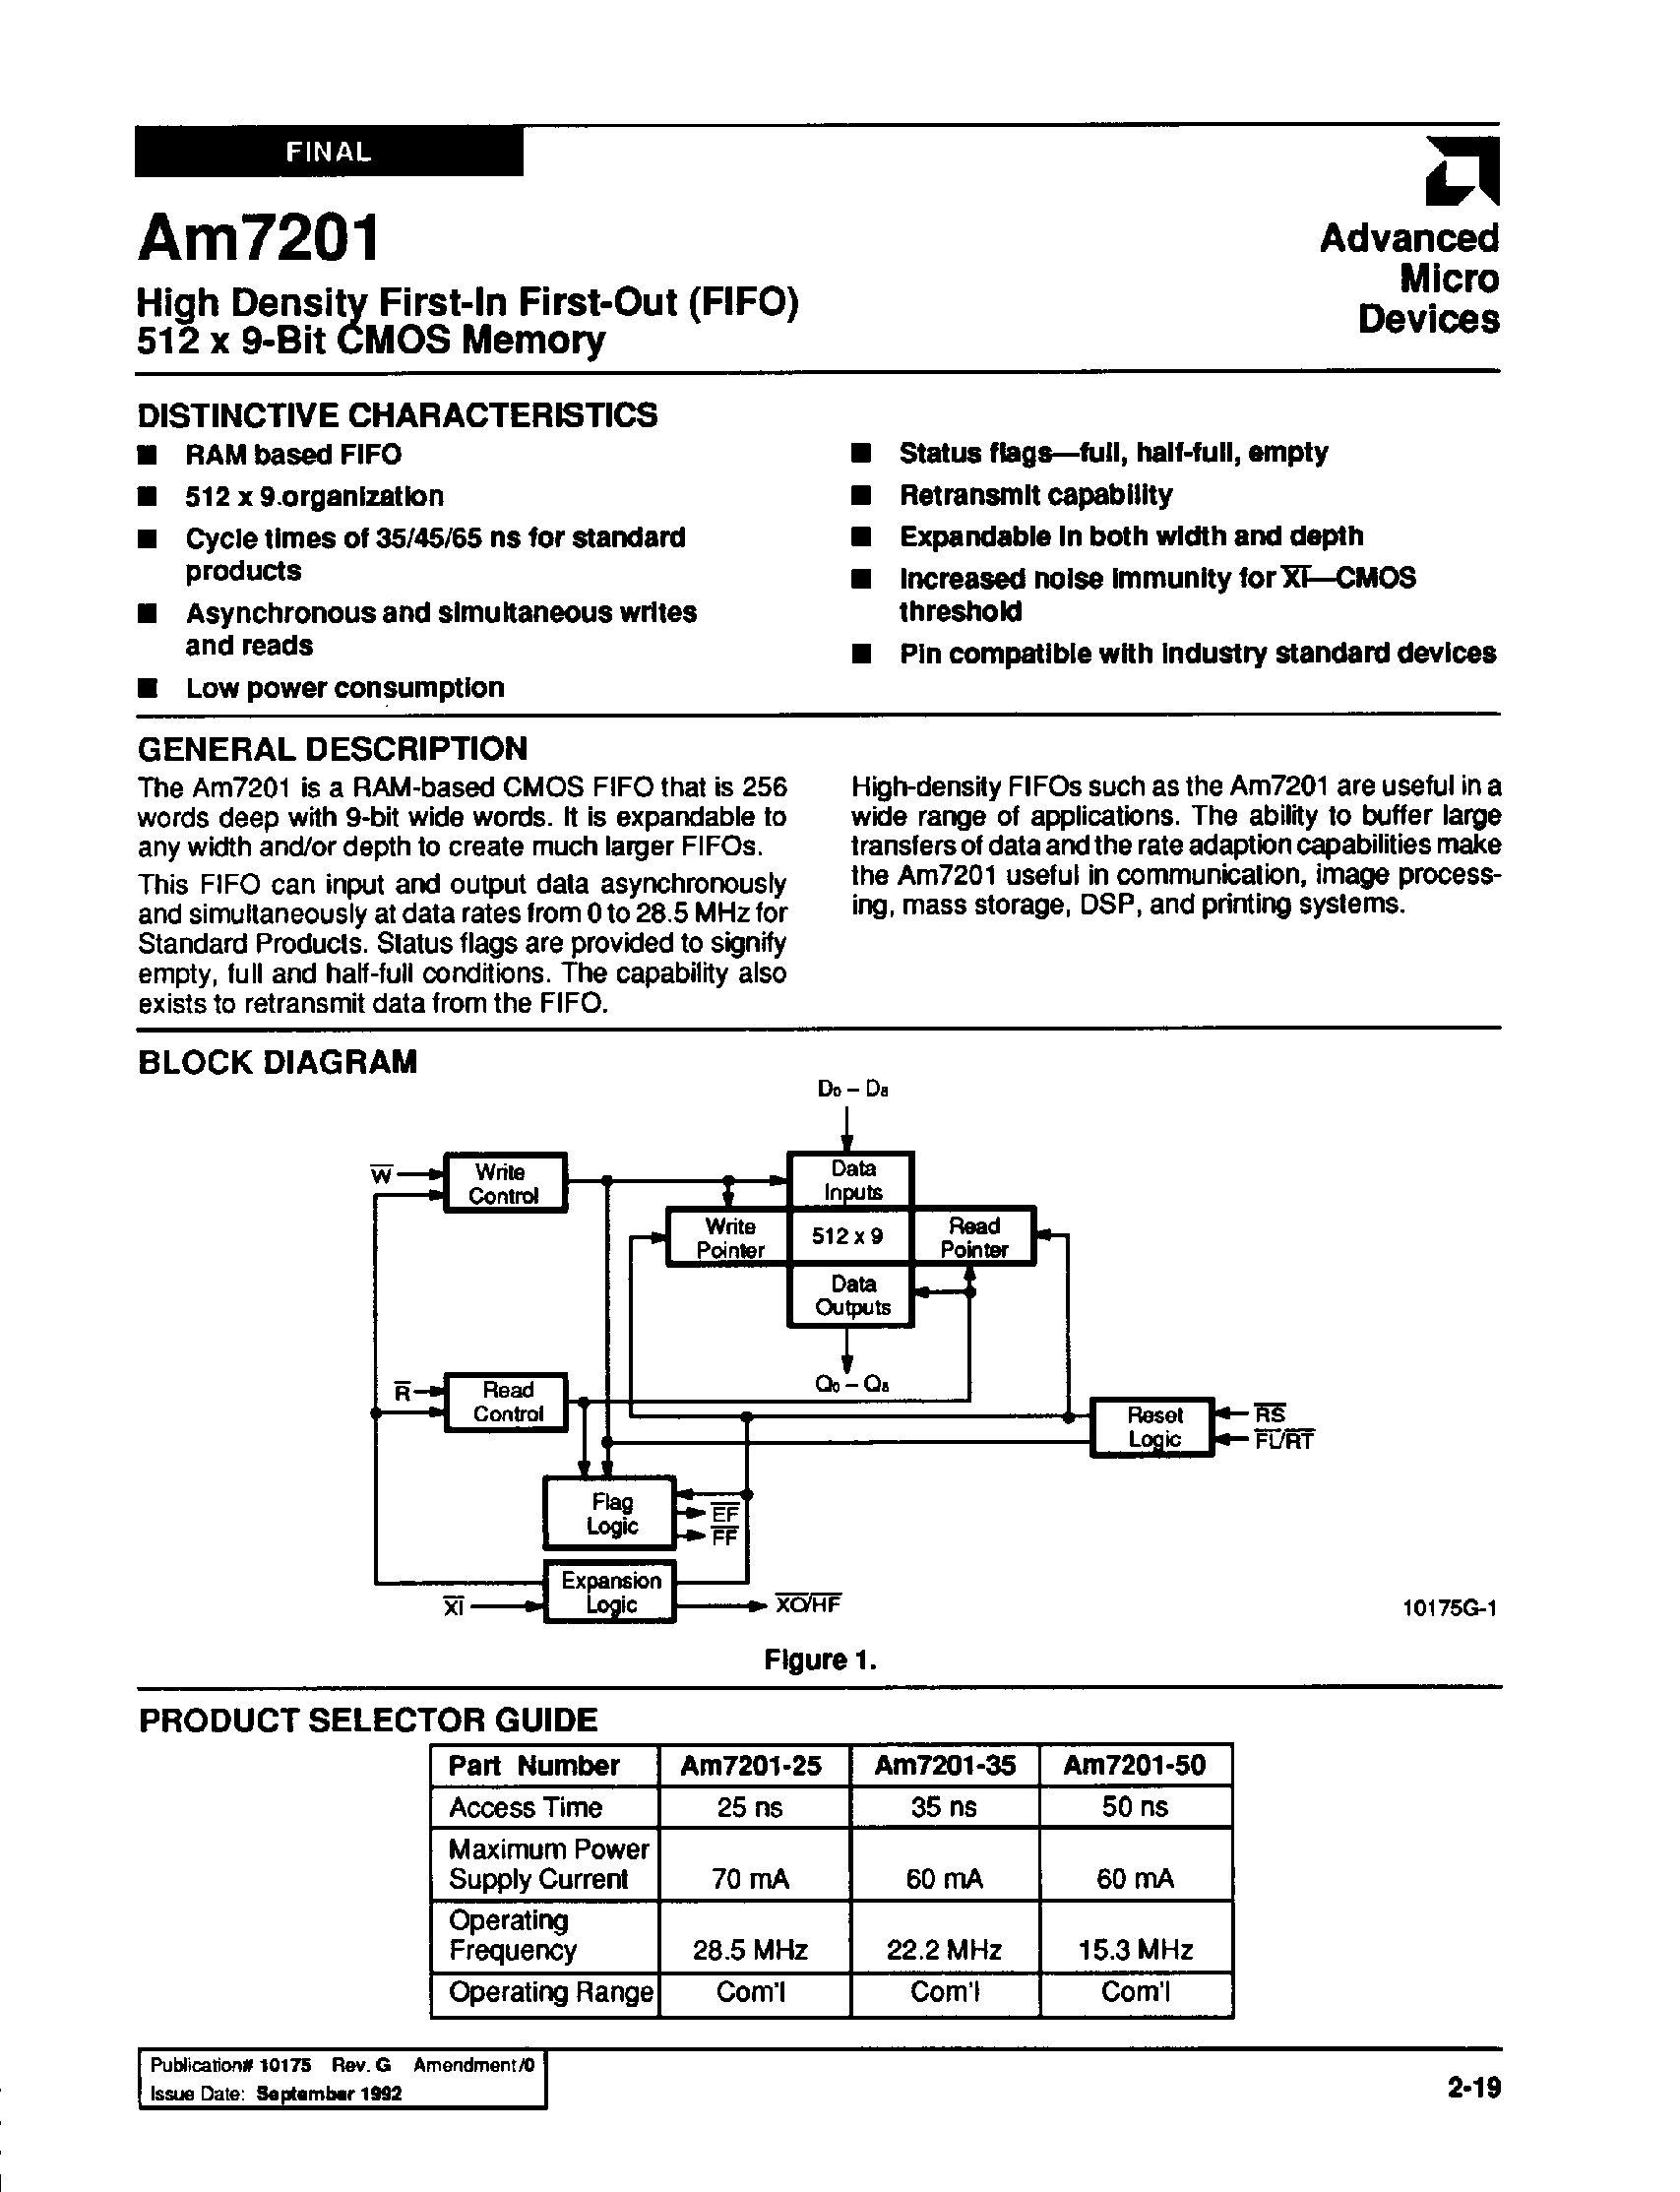 Datasheet AM7201-35 - HIGH DENSITY FIRST-IN FIRST-OUT(FIFO) 512 x 9-BIT CMOS MEMORY page 1